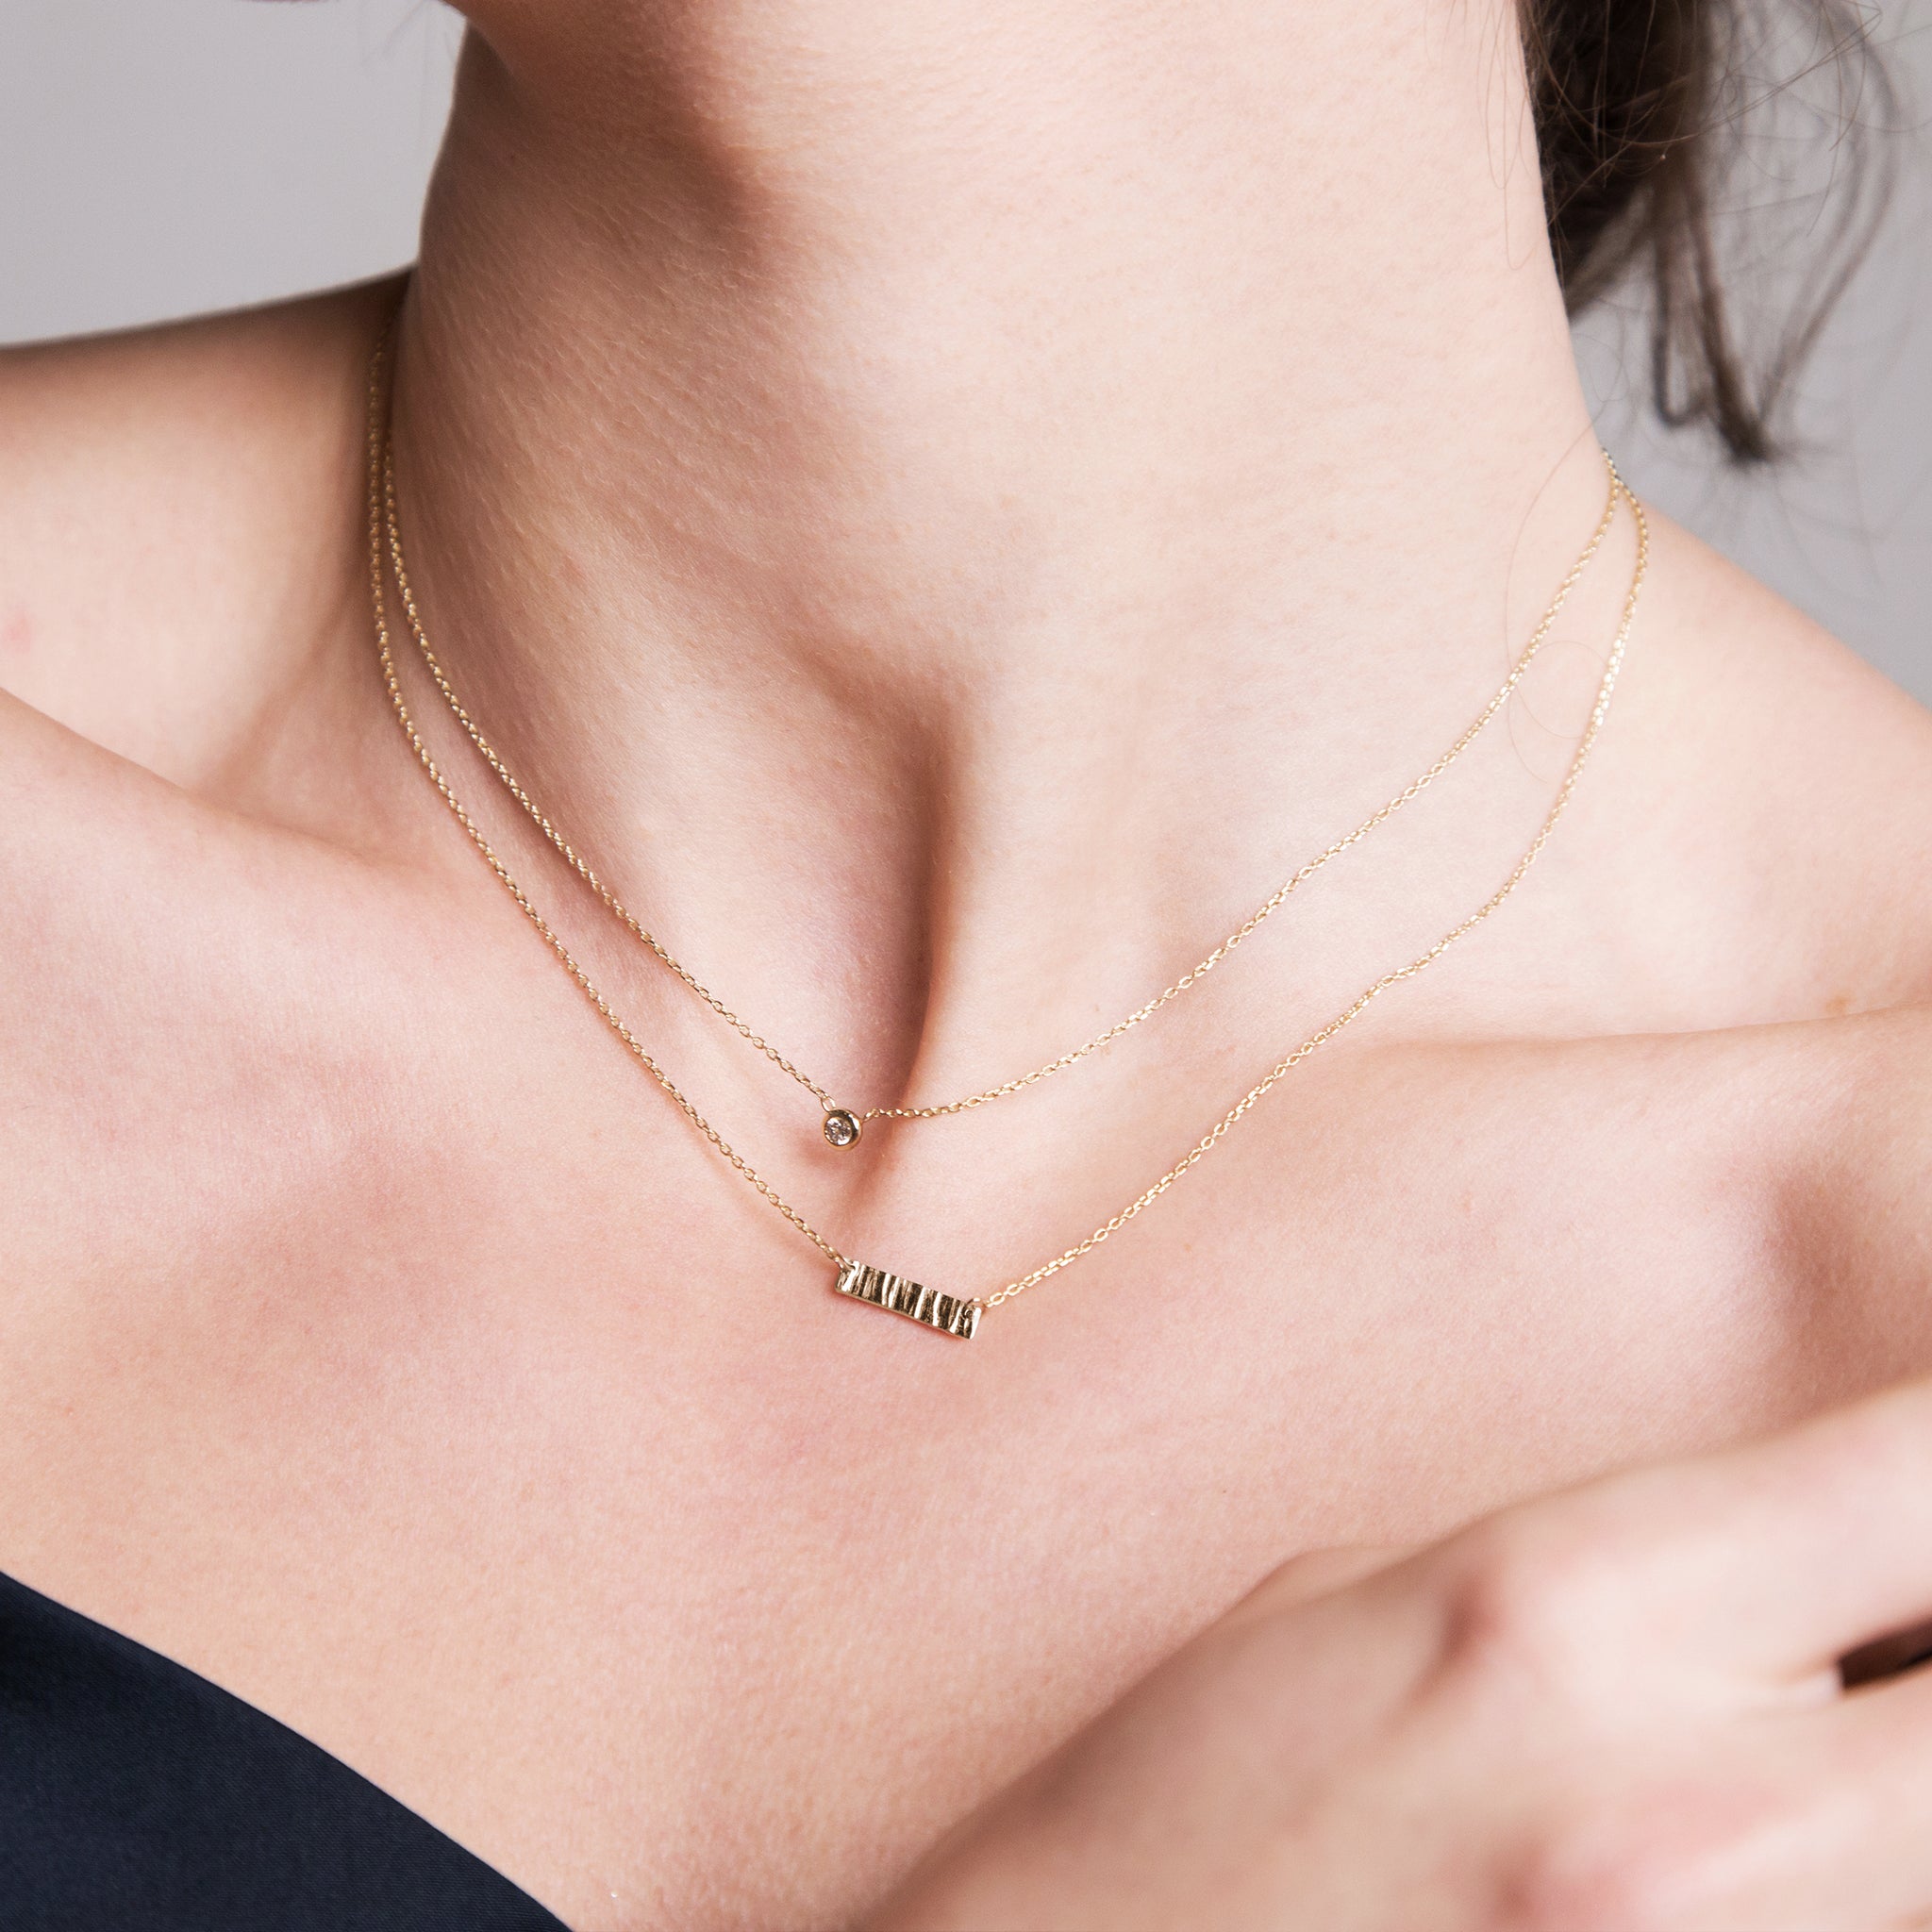 One dream Necklace (small) - 14K/ 18K Gold